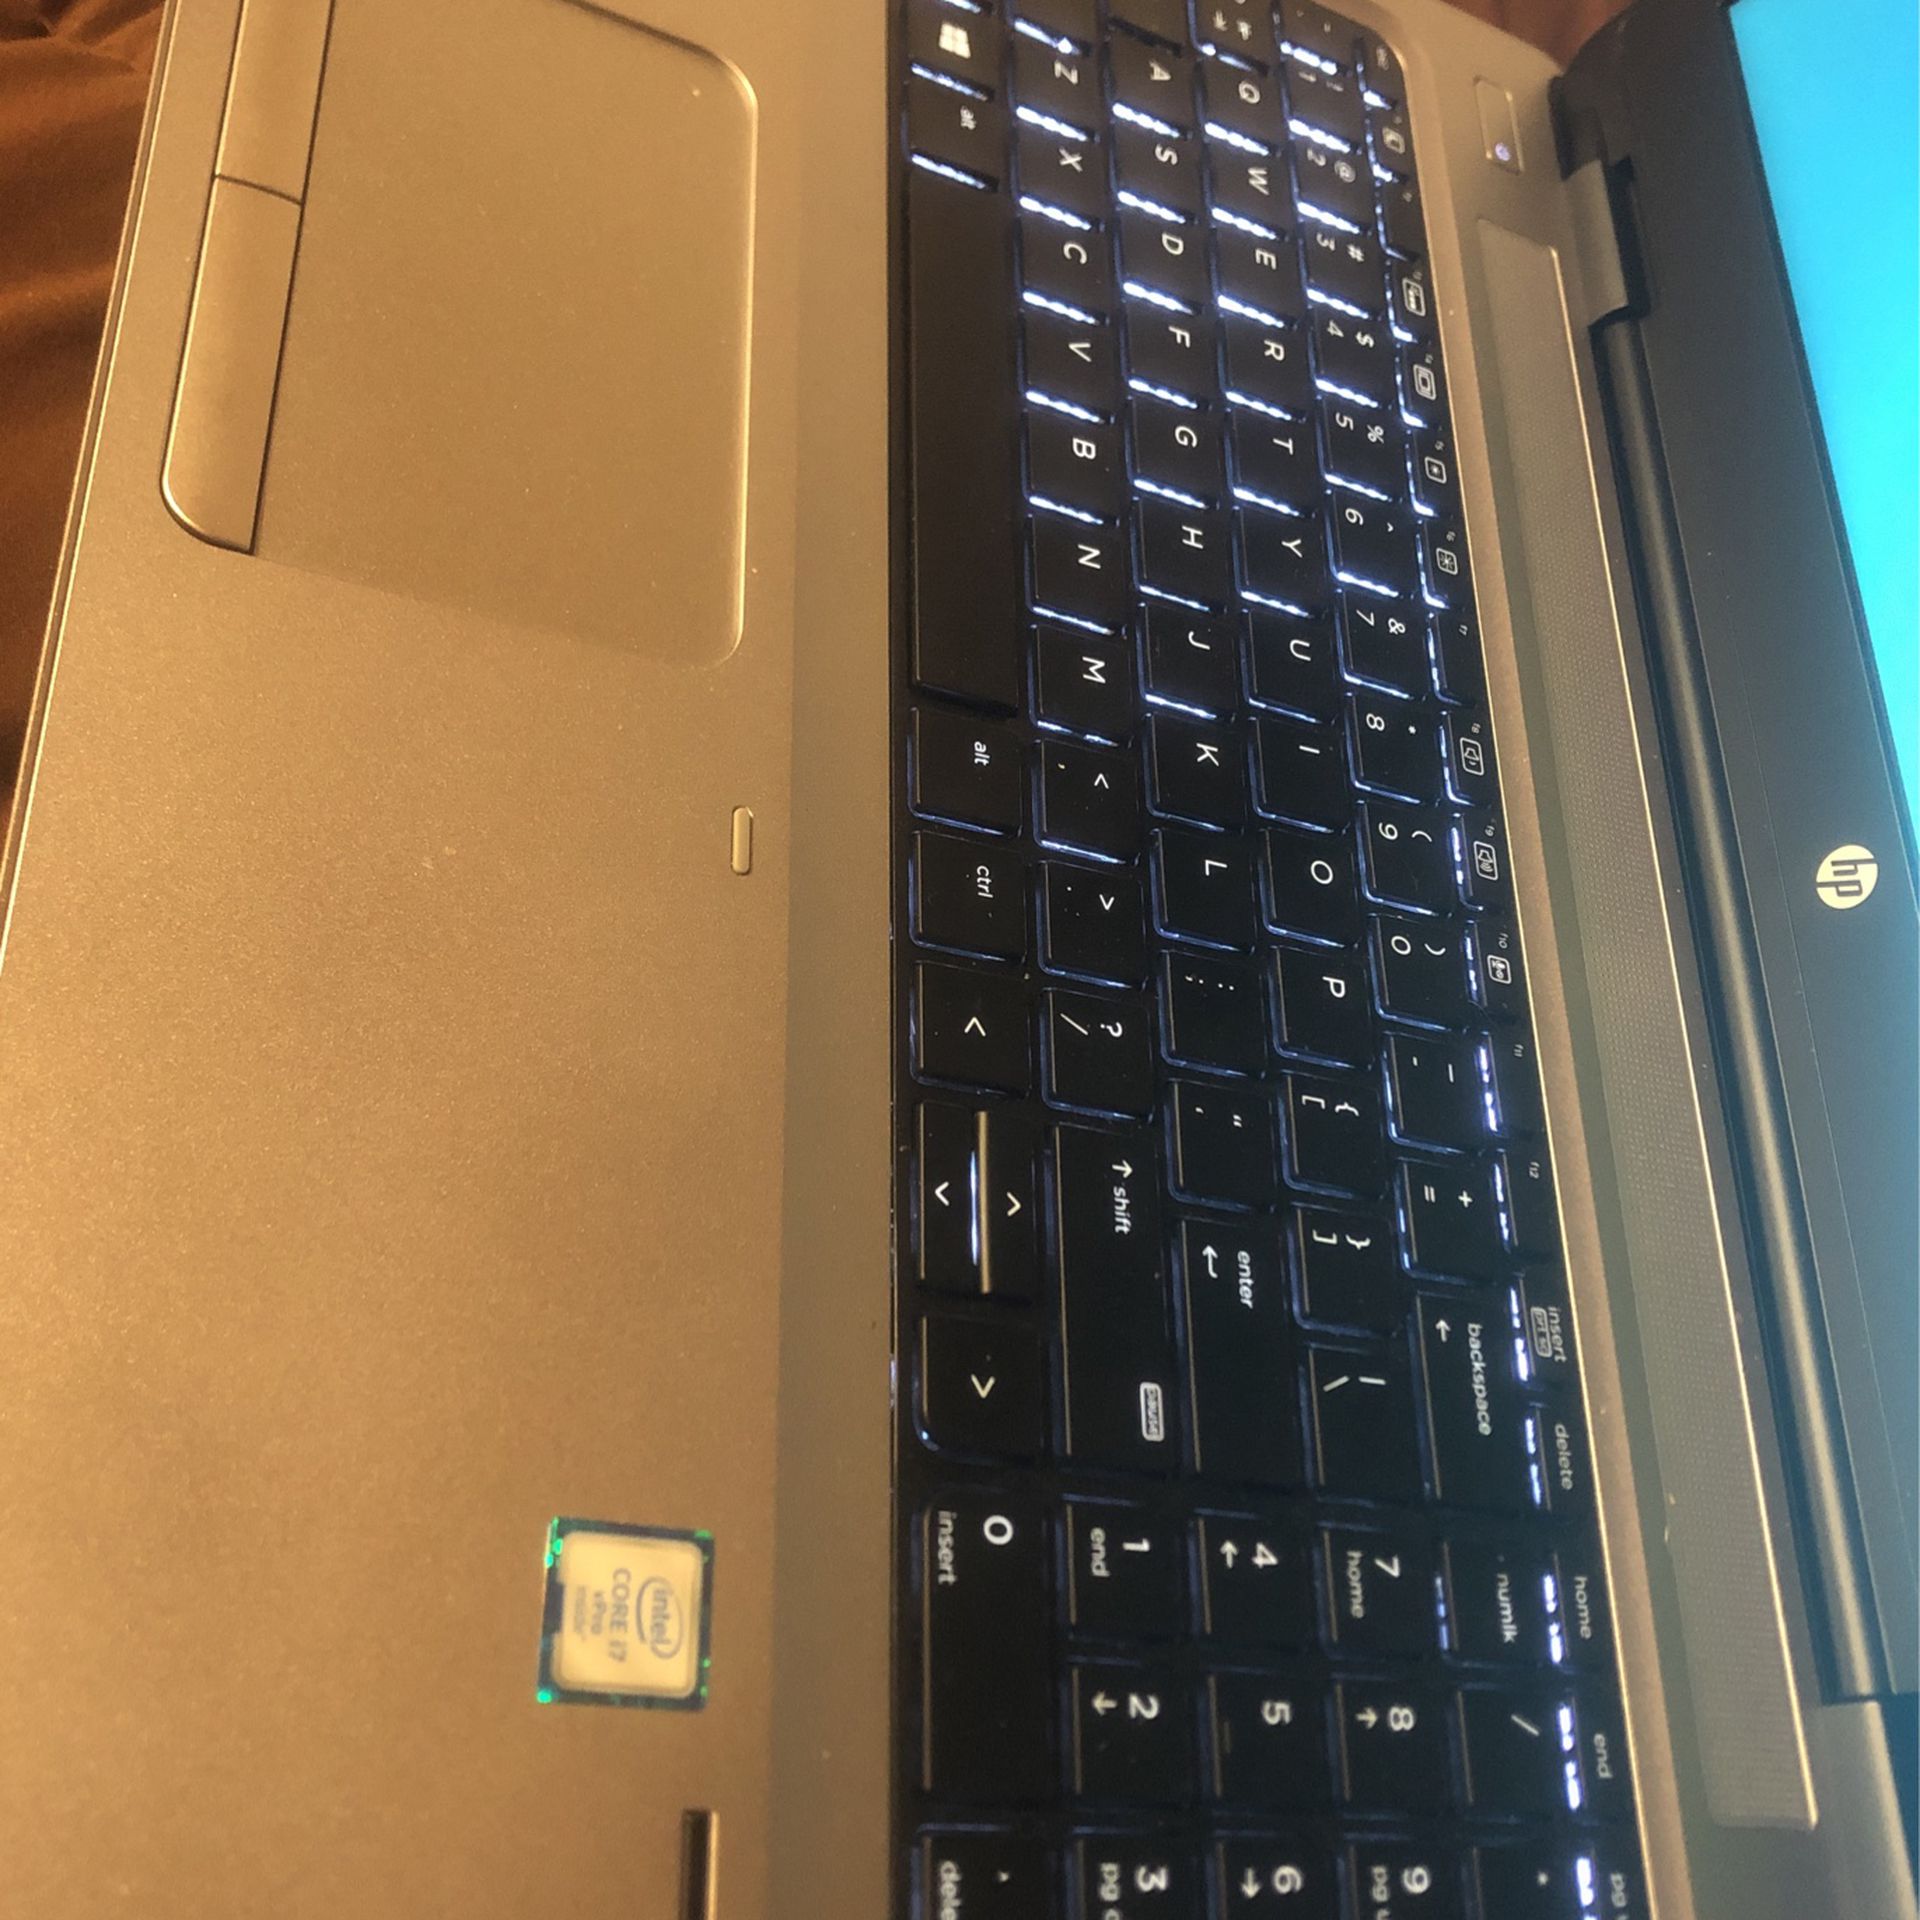 I7 Laptop 16gb Ram 256 Ssd Hard Drive Factory Refurbished 8 Second Boot Time